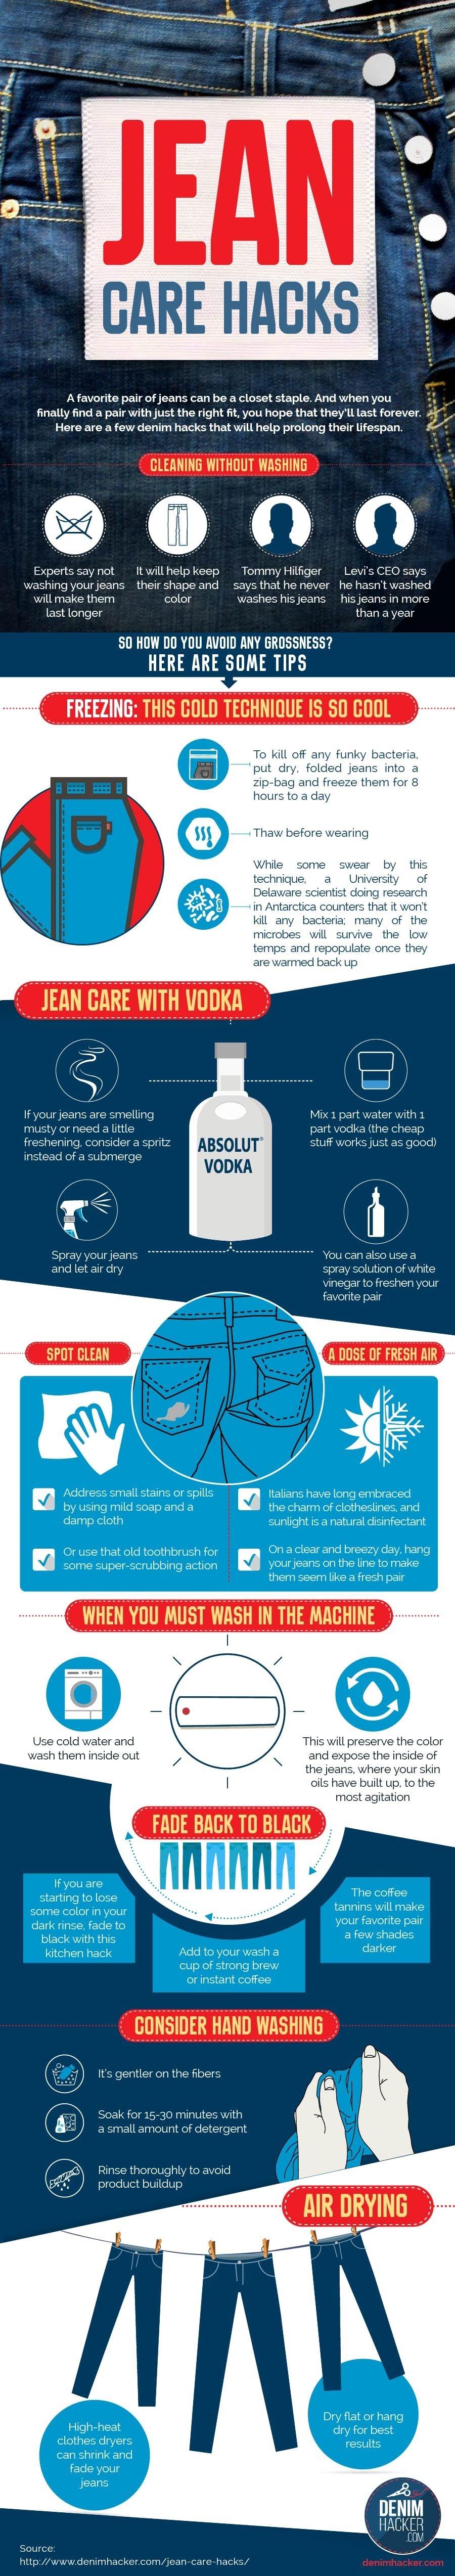 Jean Care Hacks A DIY Approach to Making Your Favorite Jeans Last #infographic